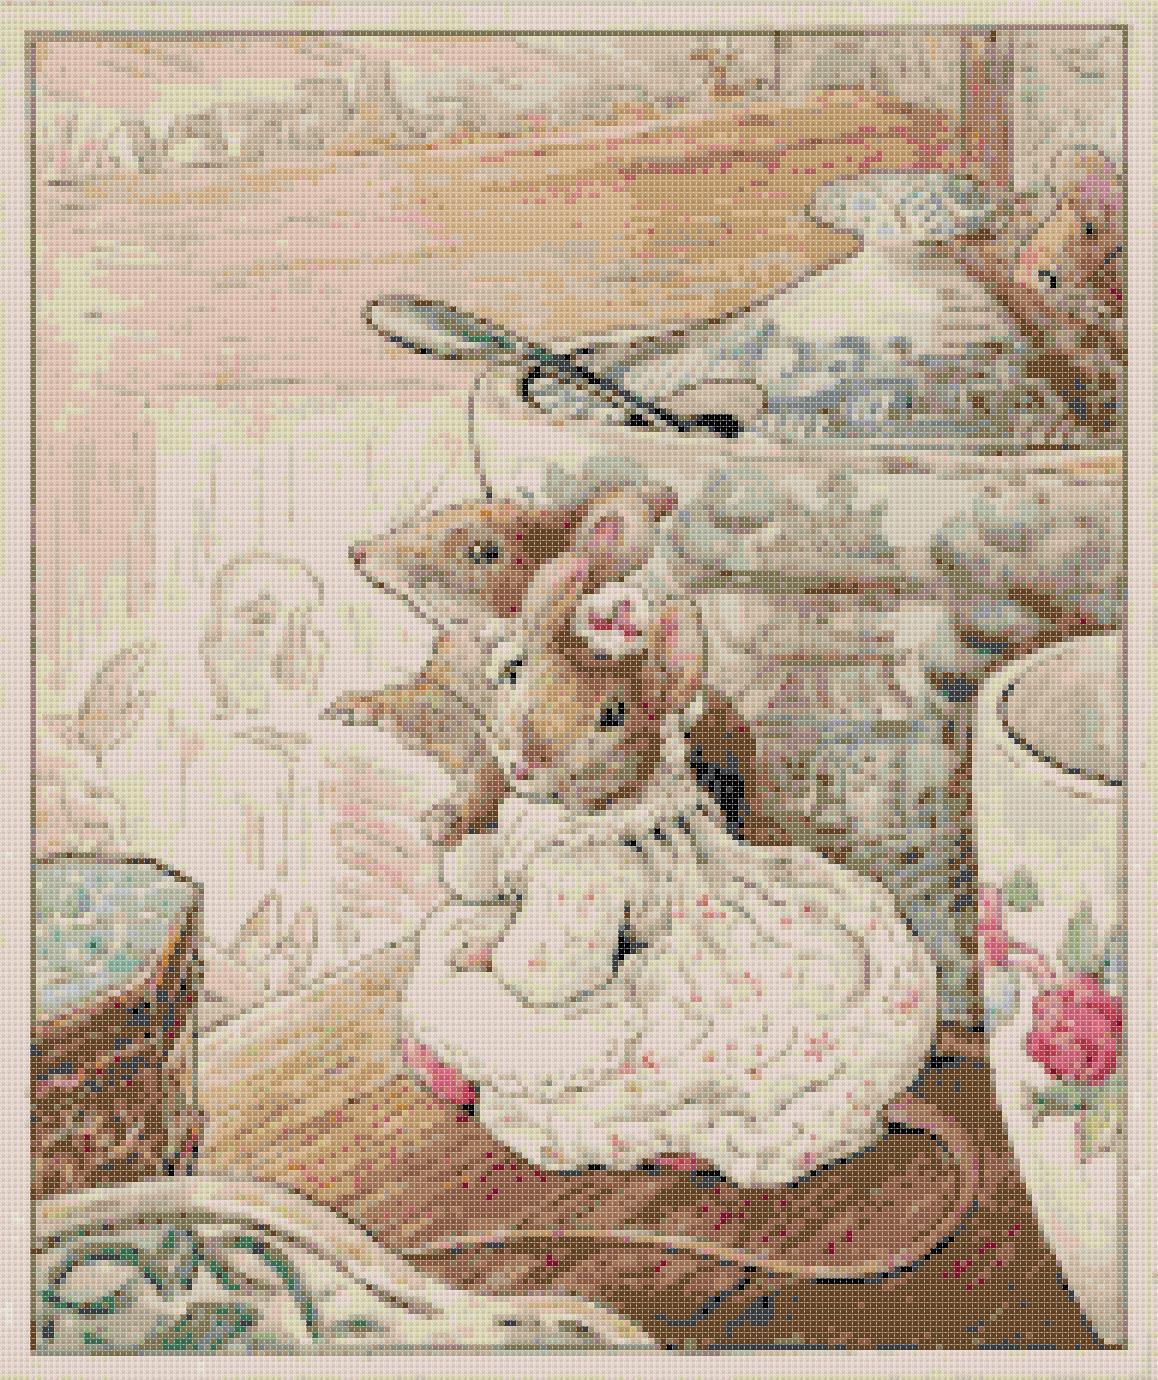 Counted Cross Stitch  B. potter's two mice married 13.79 x 16.43  L1143